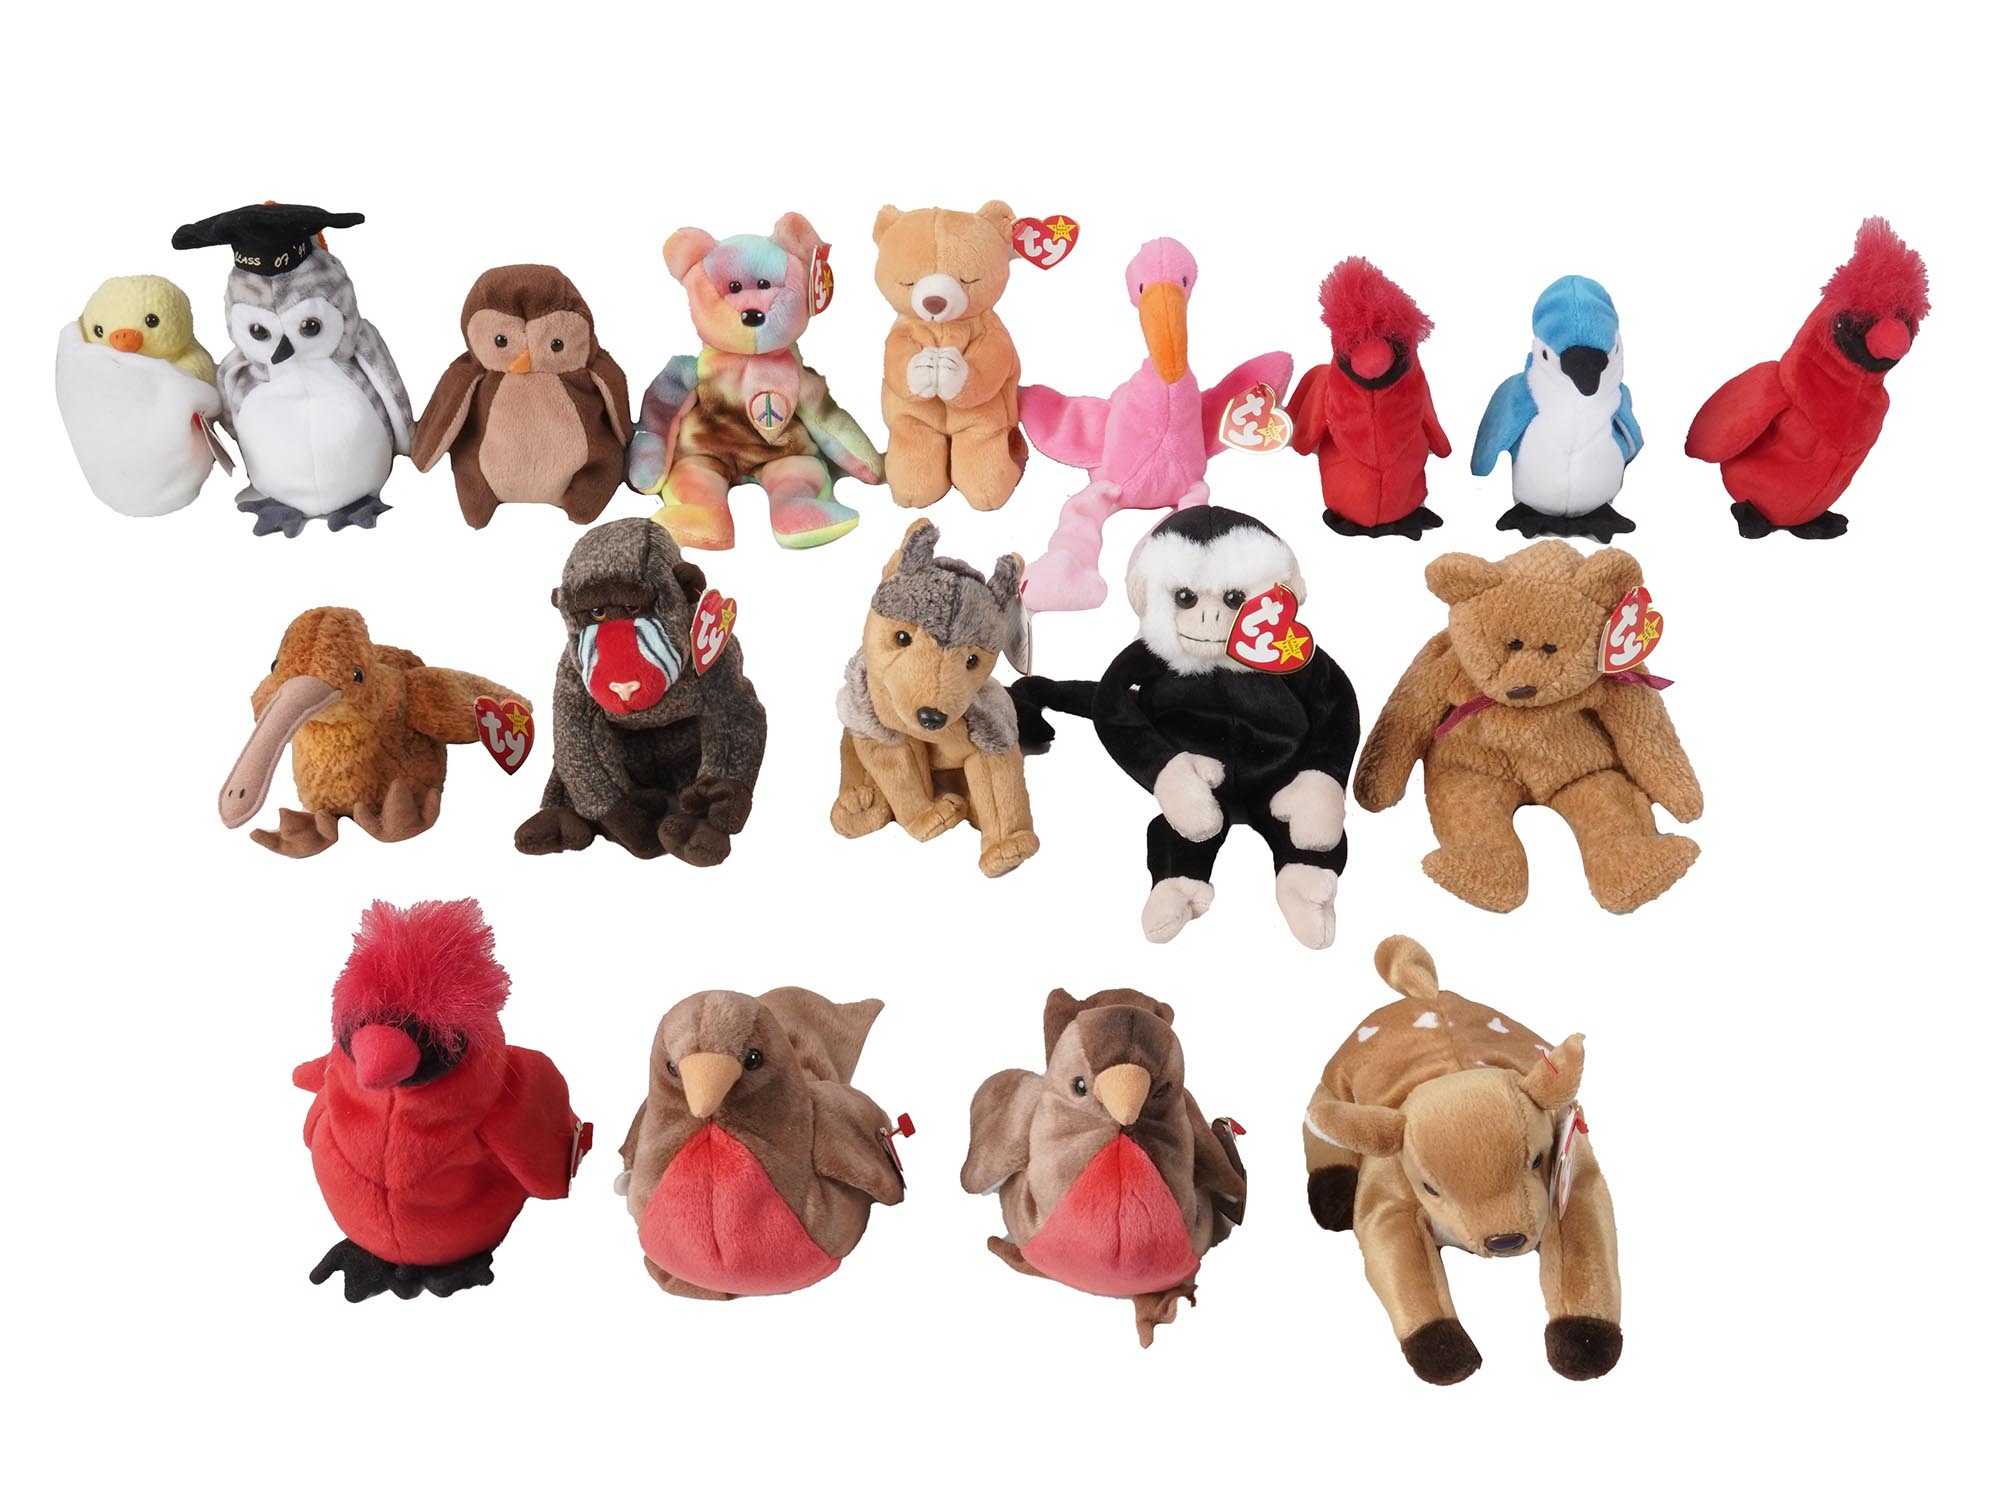 VINTAGE 1990S BEANIE BABY ANIMAL TOYS COLLECTION PIC-2